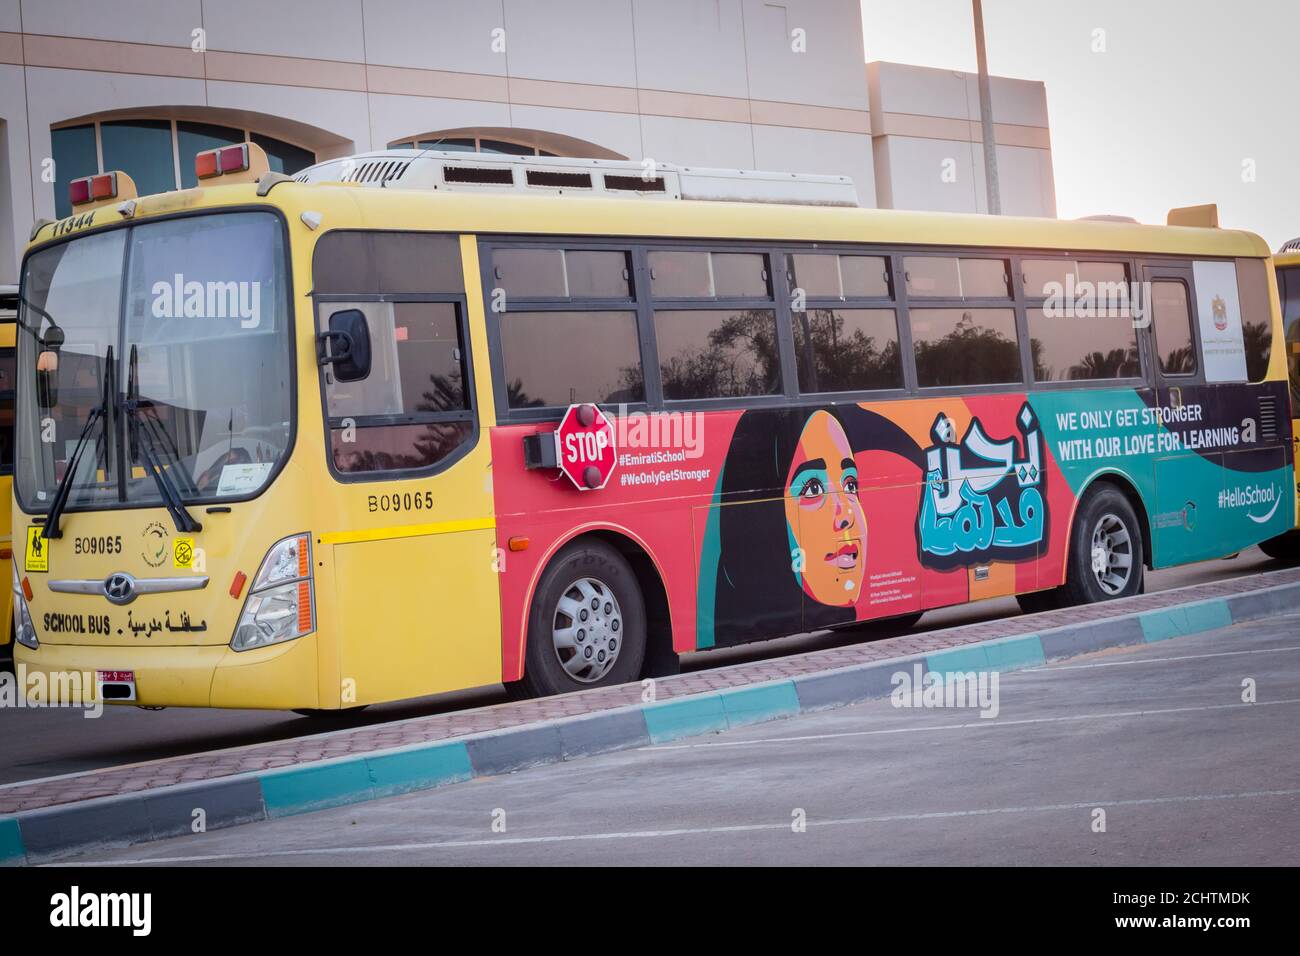 Yellow school bus in Abu Dhabi, United Arab Emirates, Dubai, Emirates, Gulf, Middle east. Awareness signs and symbol was written in arabic language at Stock Photo